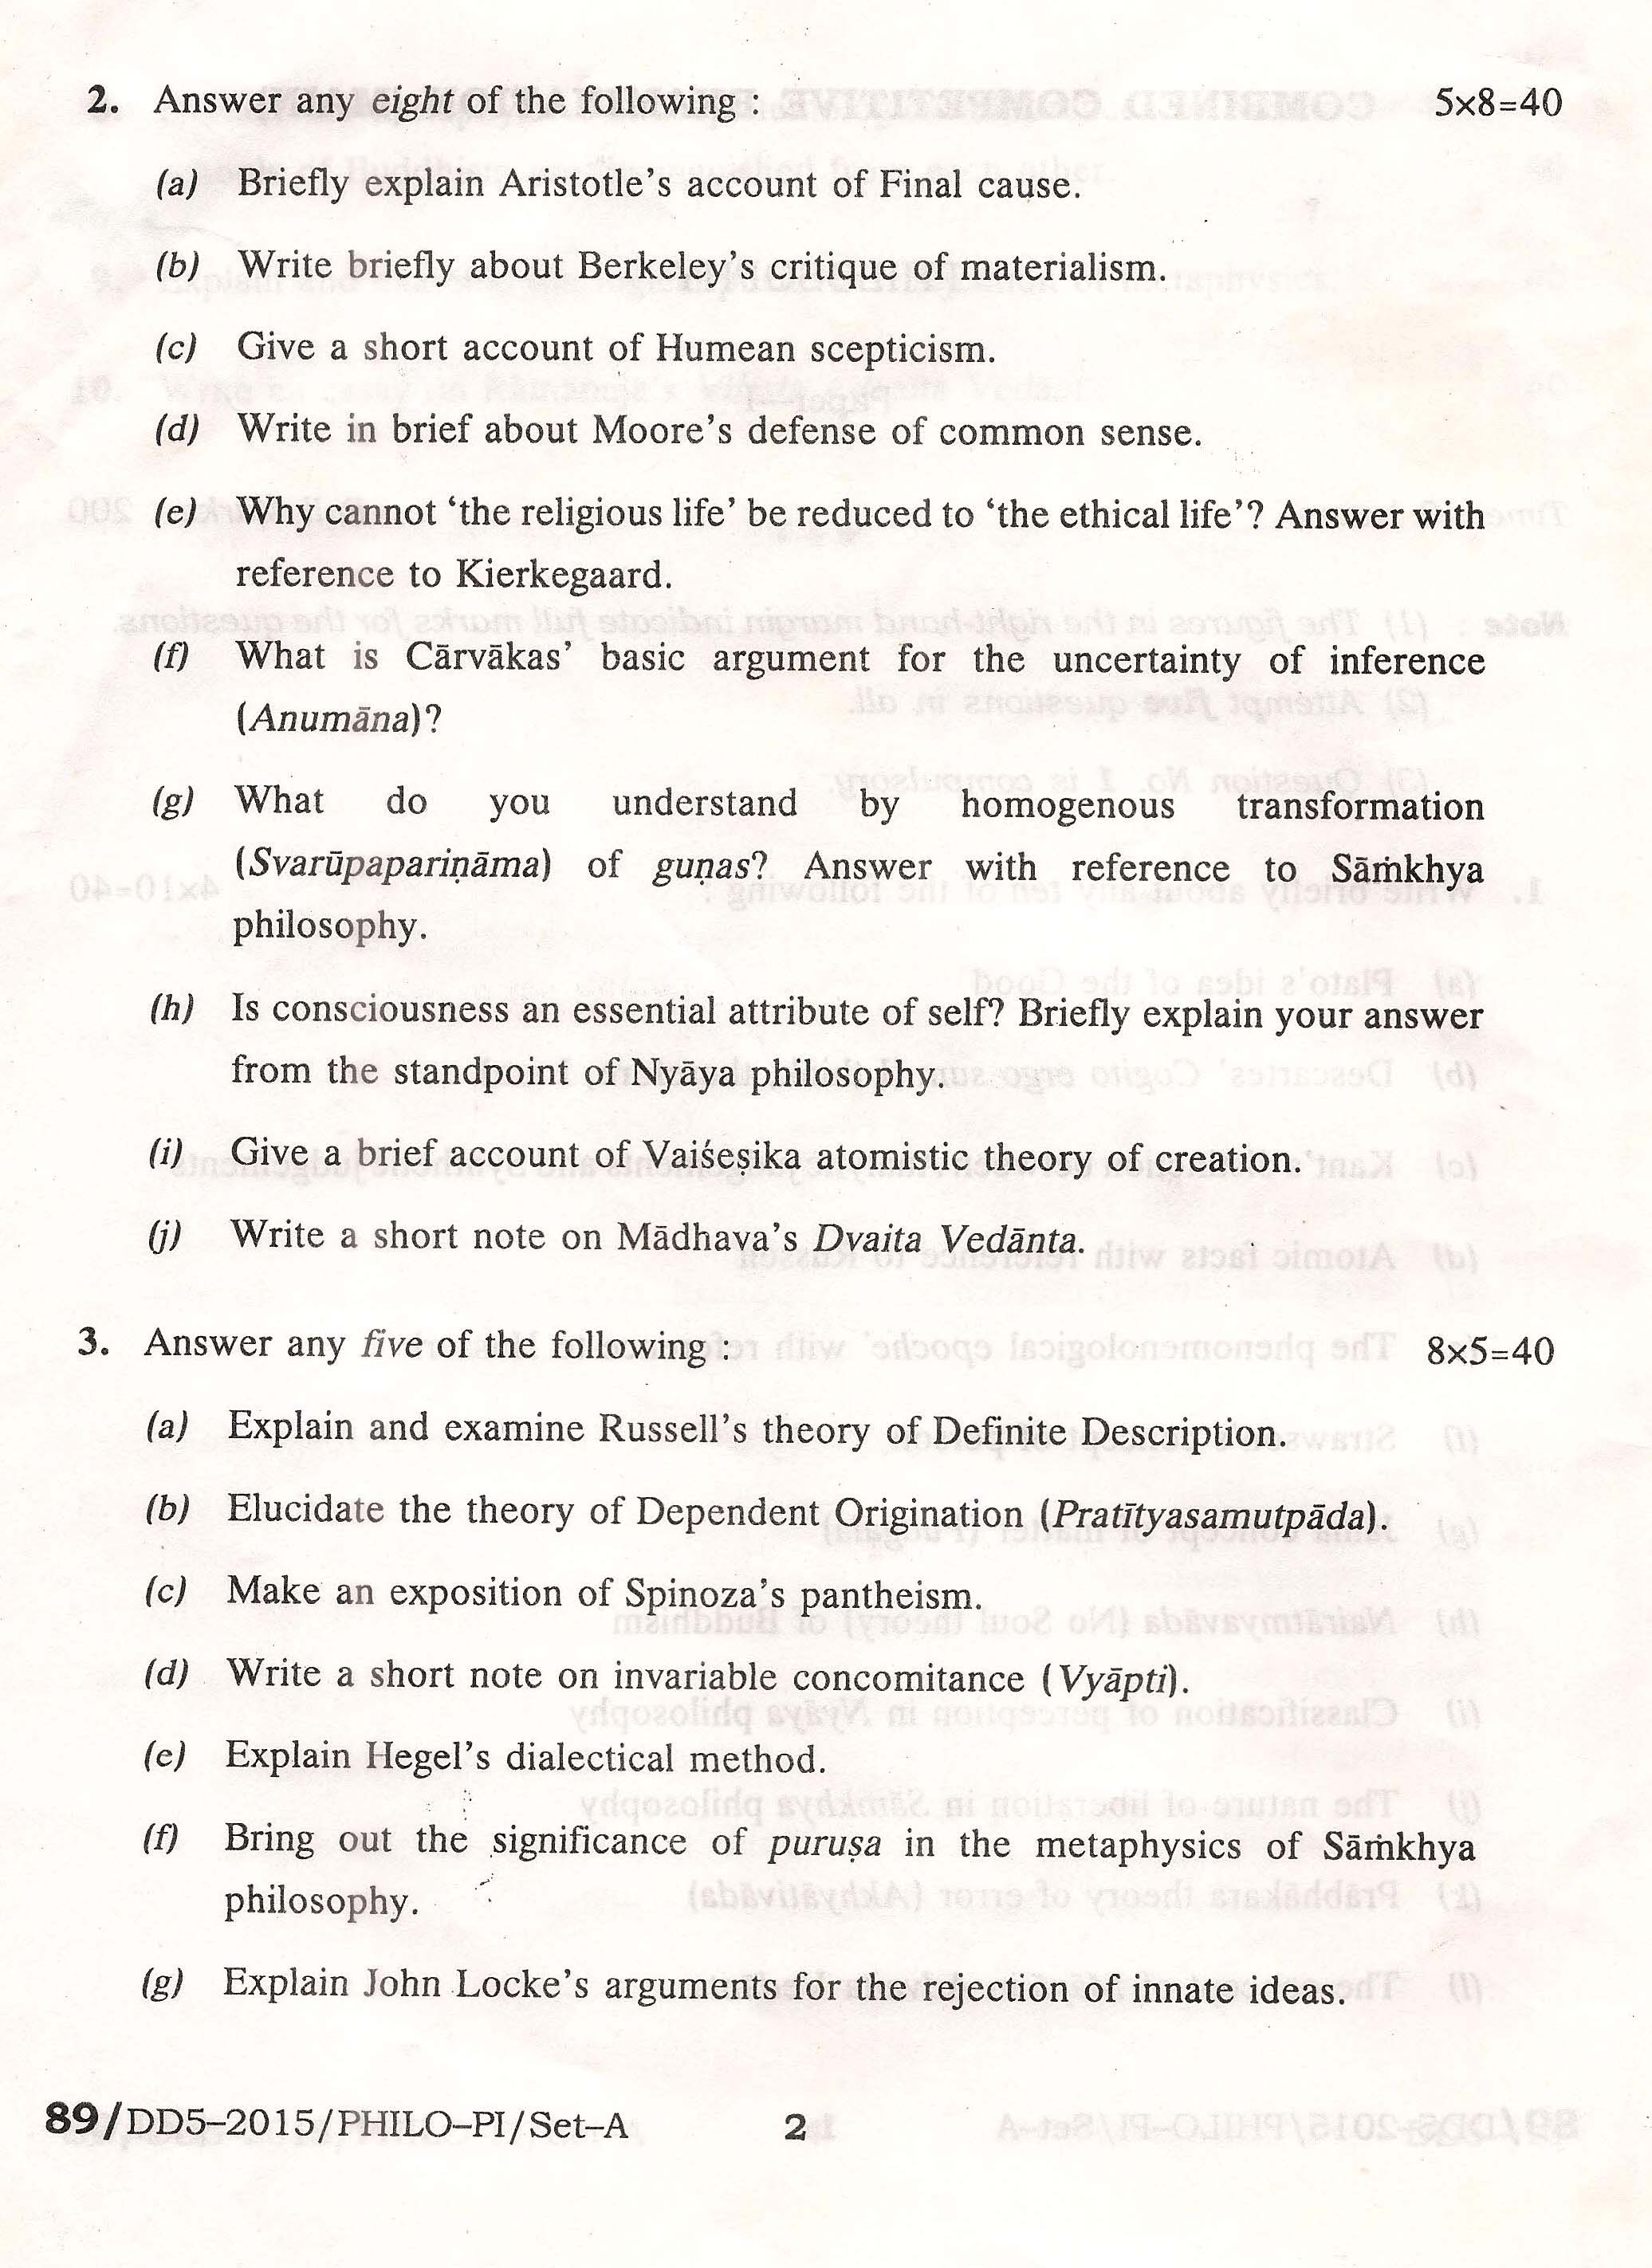 APPSC Combined Competitive Main Exam 2015 Philosophy Paper I 2